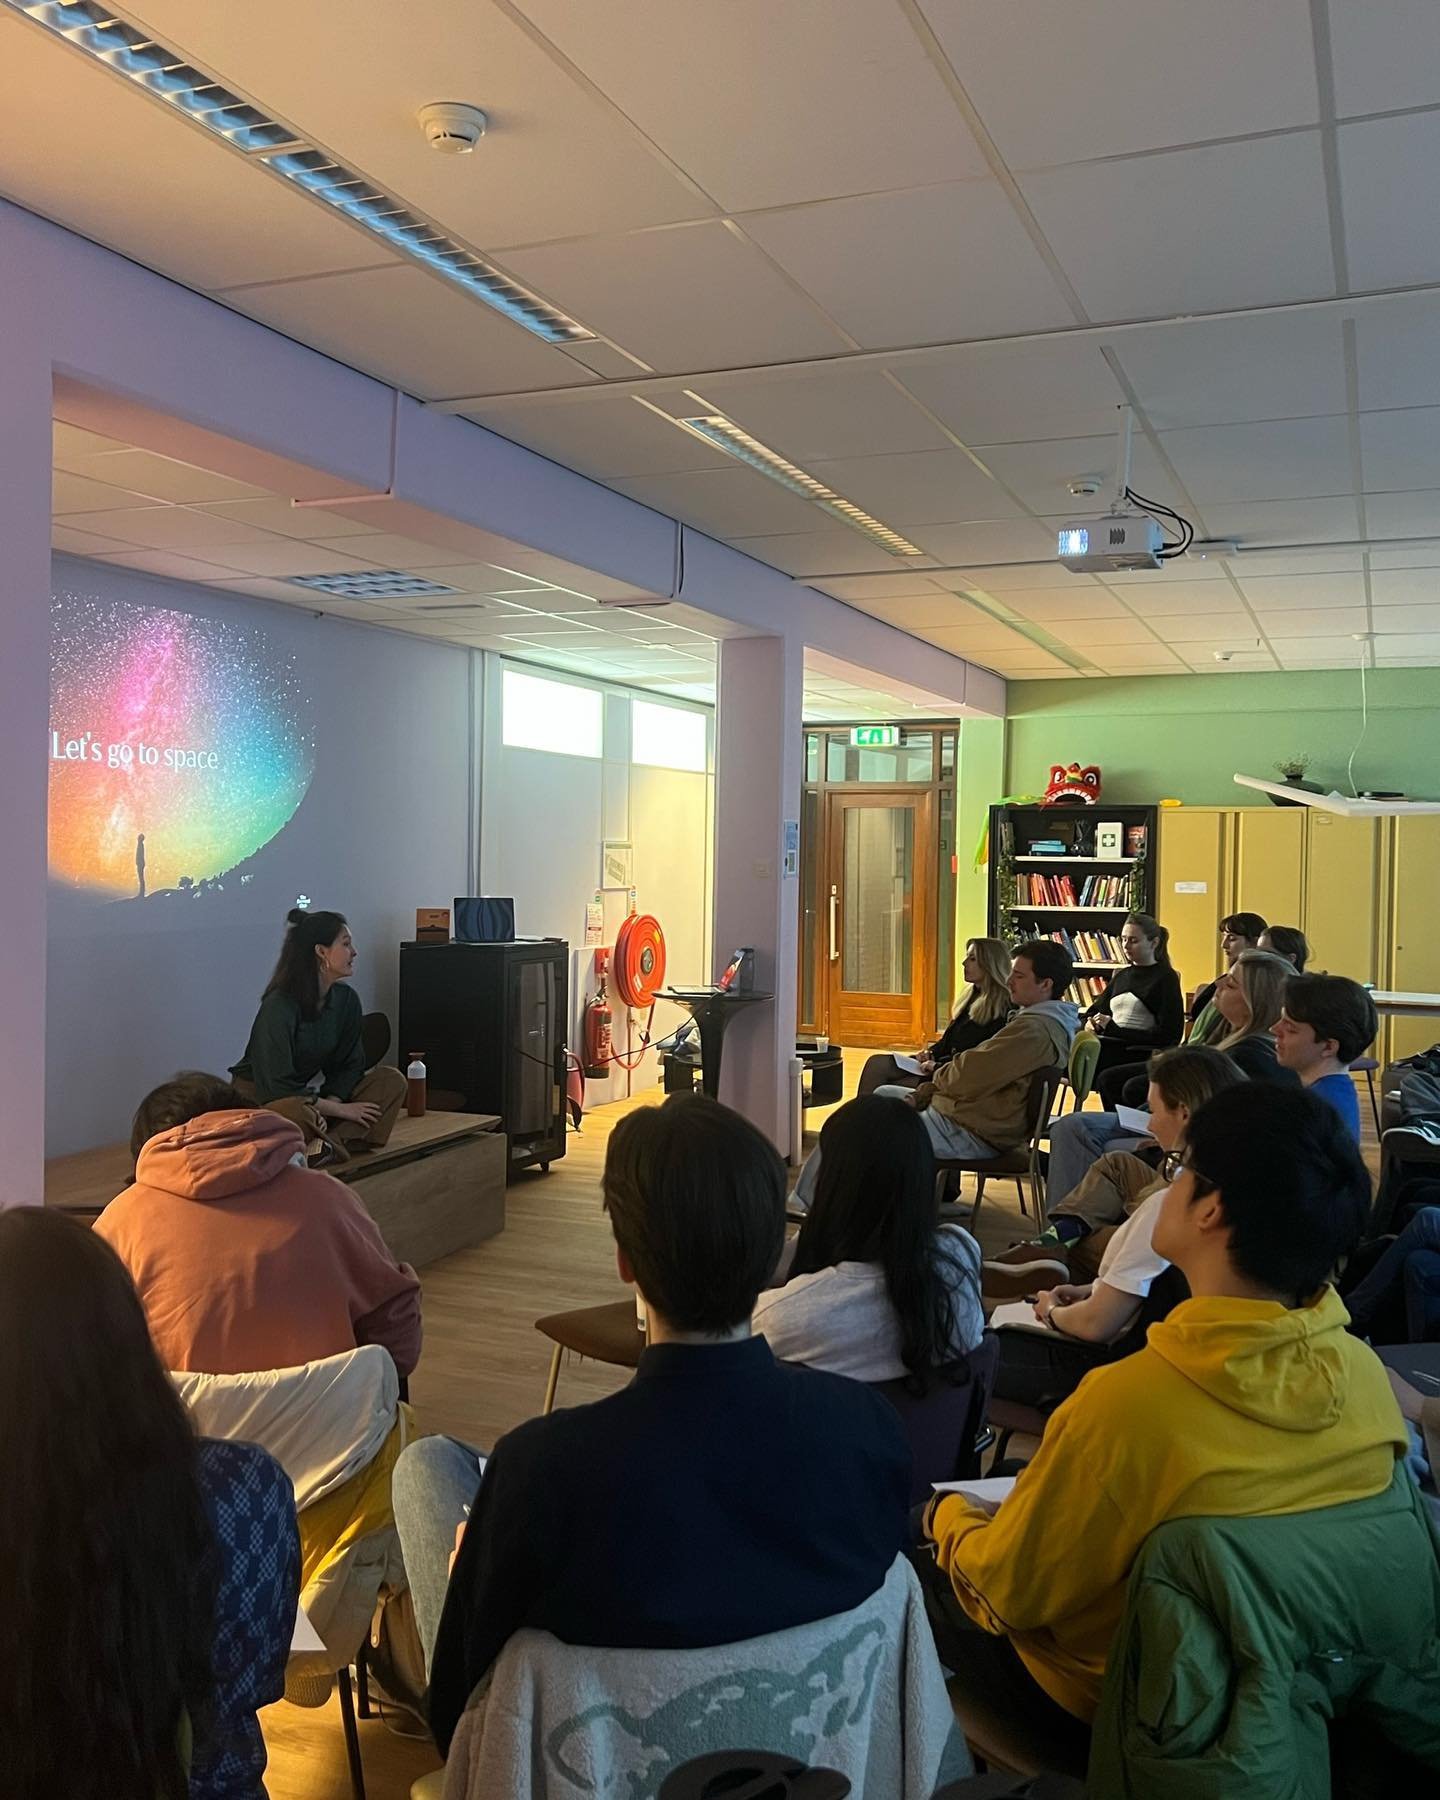 Recently @talisaong hosted an inspiring future workshop at the Universiteit van Amsterdam, where a group of driven students delved deep into the trend &lsquo;Transformive Twenties&rsquo;. ⚡️

Through interactive exercises like the &lsquo;Outside-In C